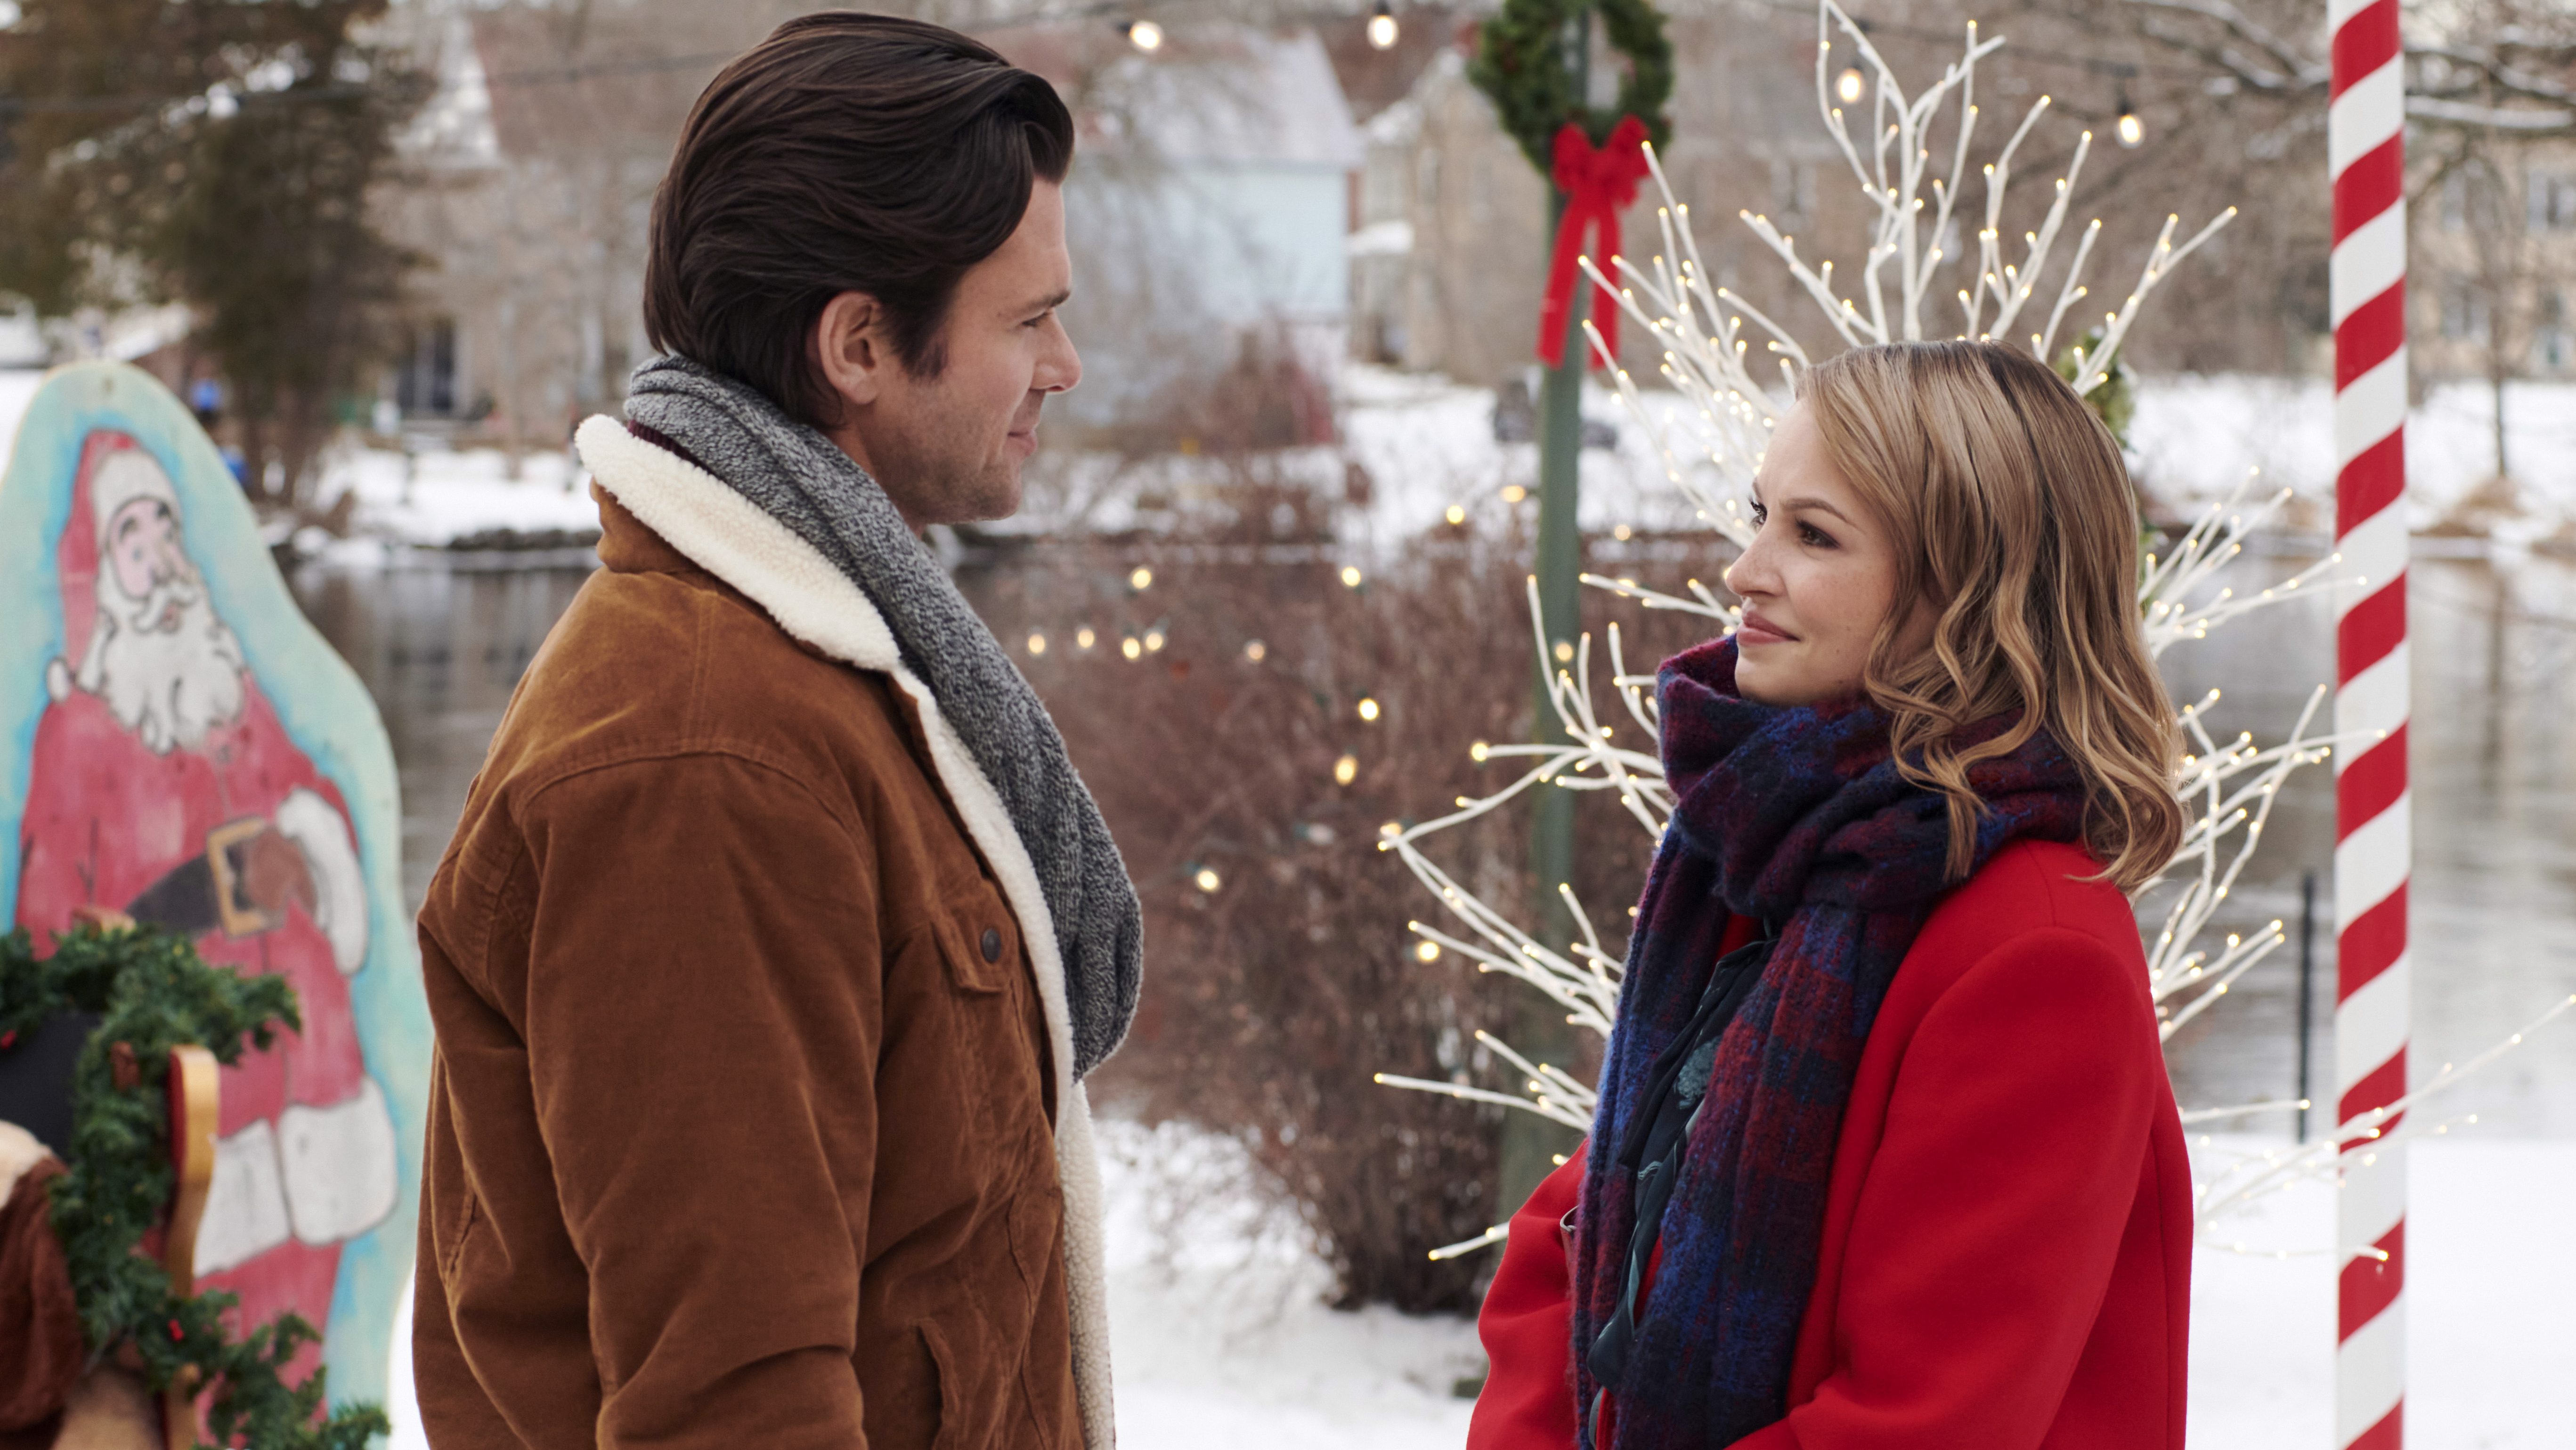 Kevin McGarry, Kayla Wallace, 'My Grown-Up Christmas List', 2022